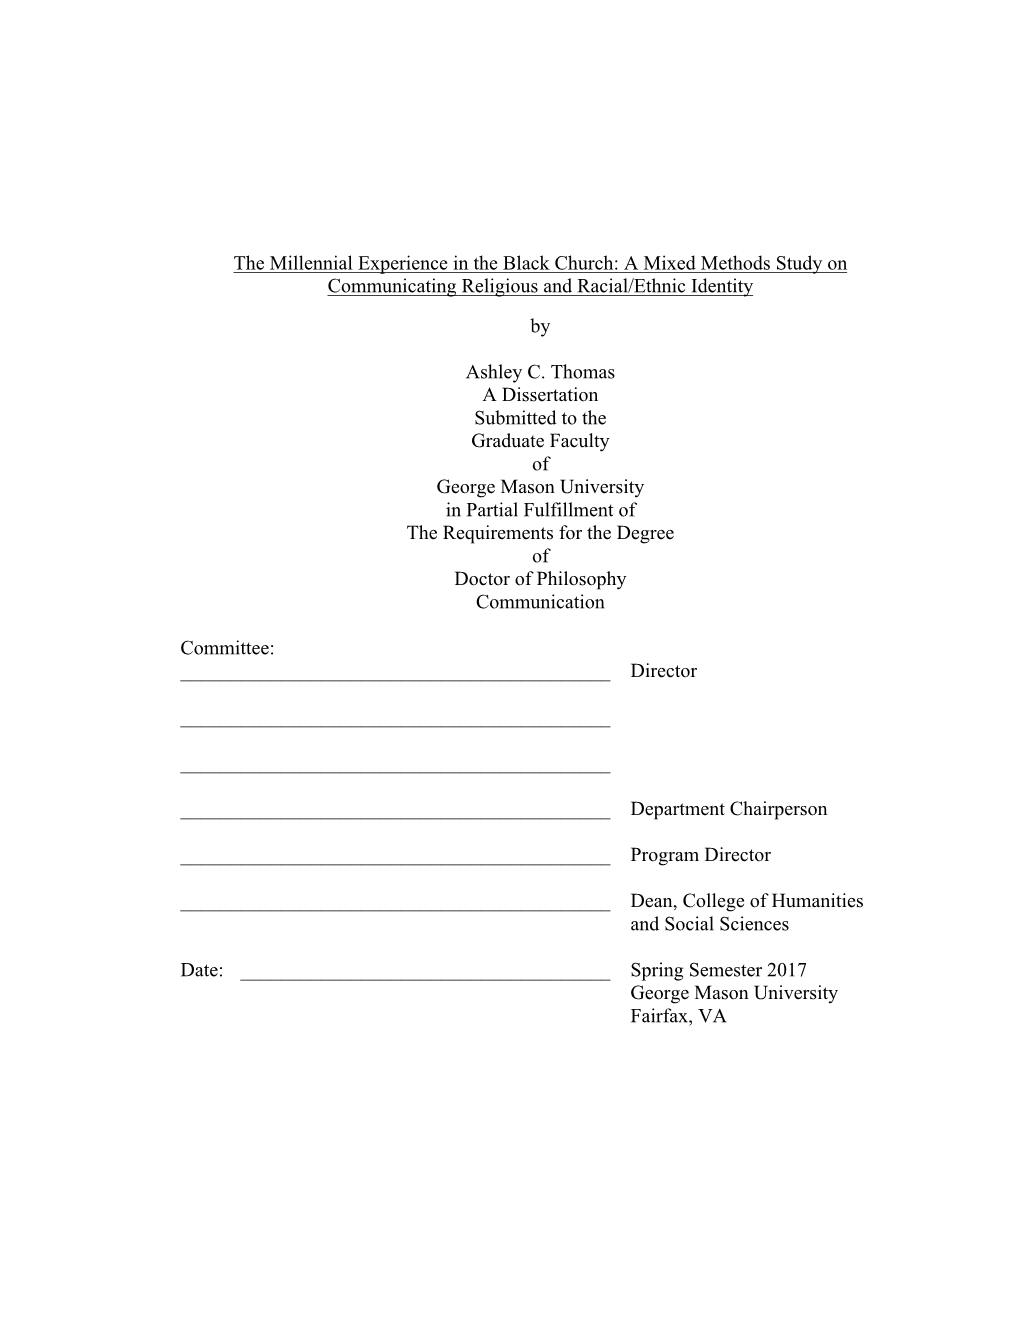 The Millennial Experience in the Black Church: a Mixed Methods Study on Communicating Religious and Racial/Ethnic Identity By